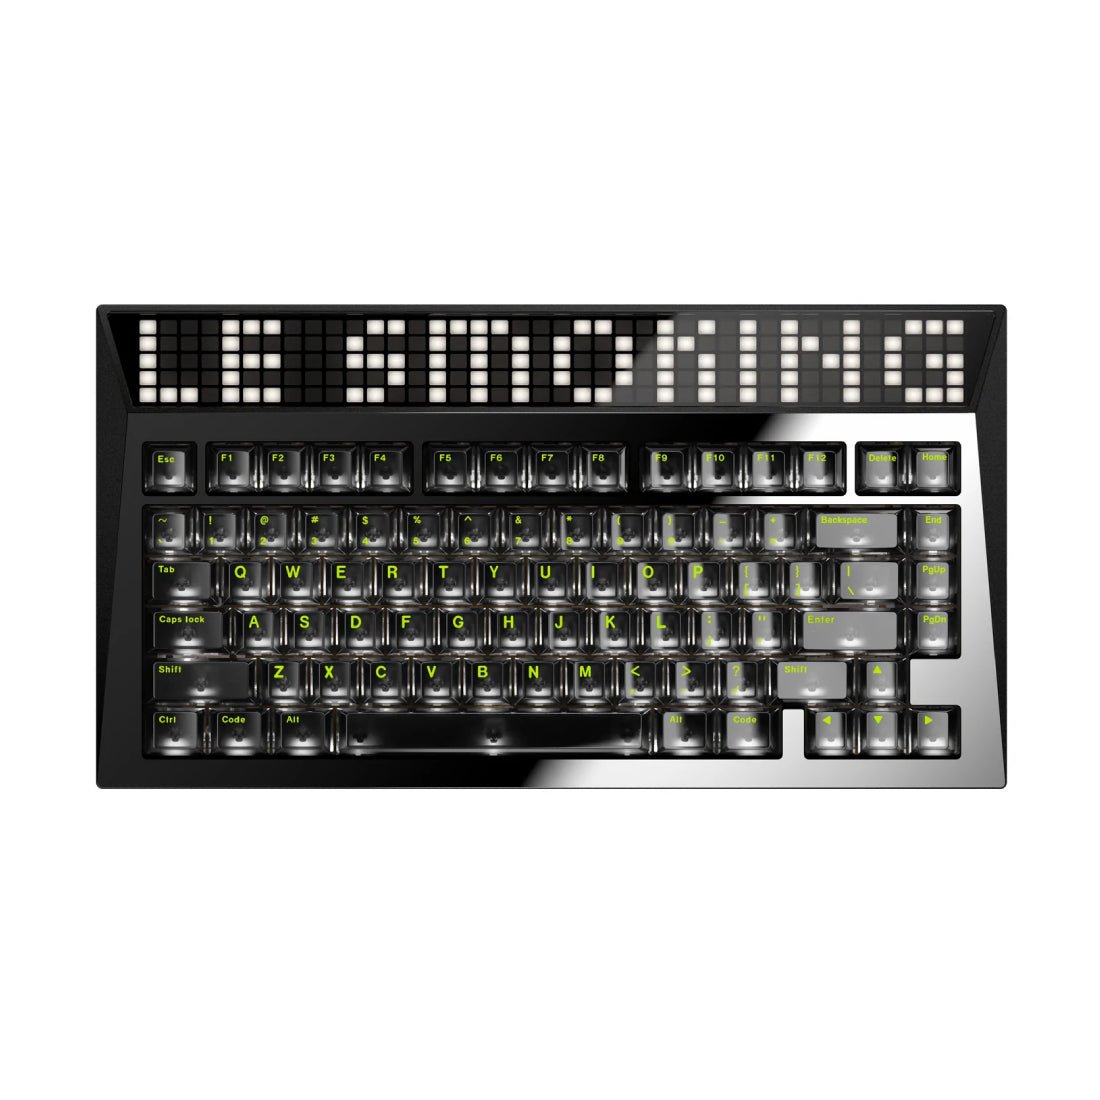 AngryMiao Cyberboard R2 Le Smoking Wireless Keyboard Limited Edition - Jet Black - Store 974 | ستور ٩٧٤